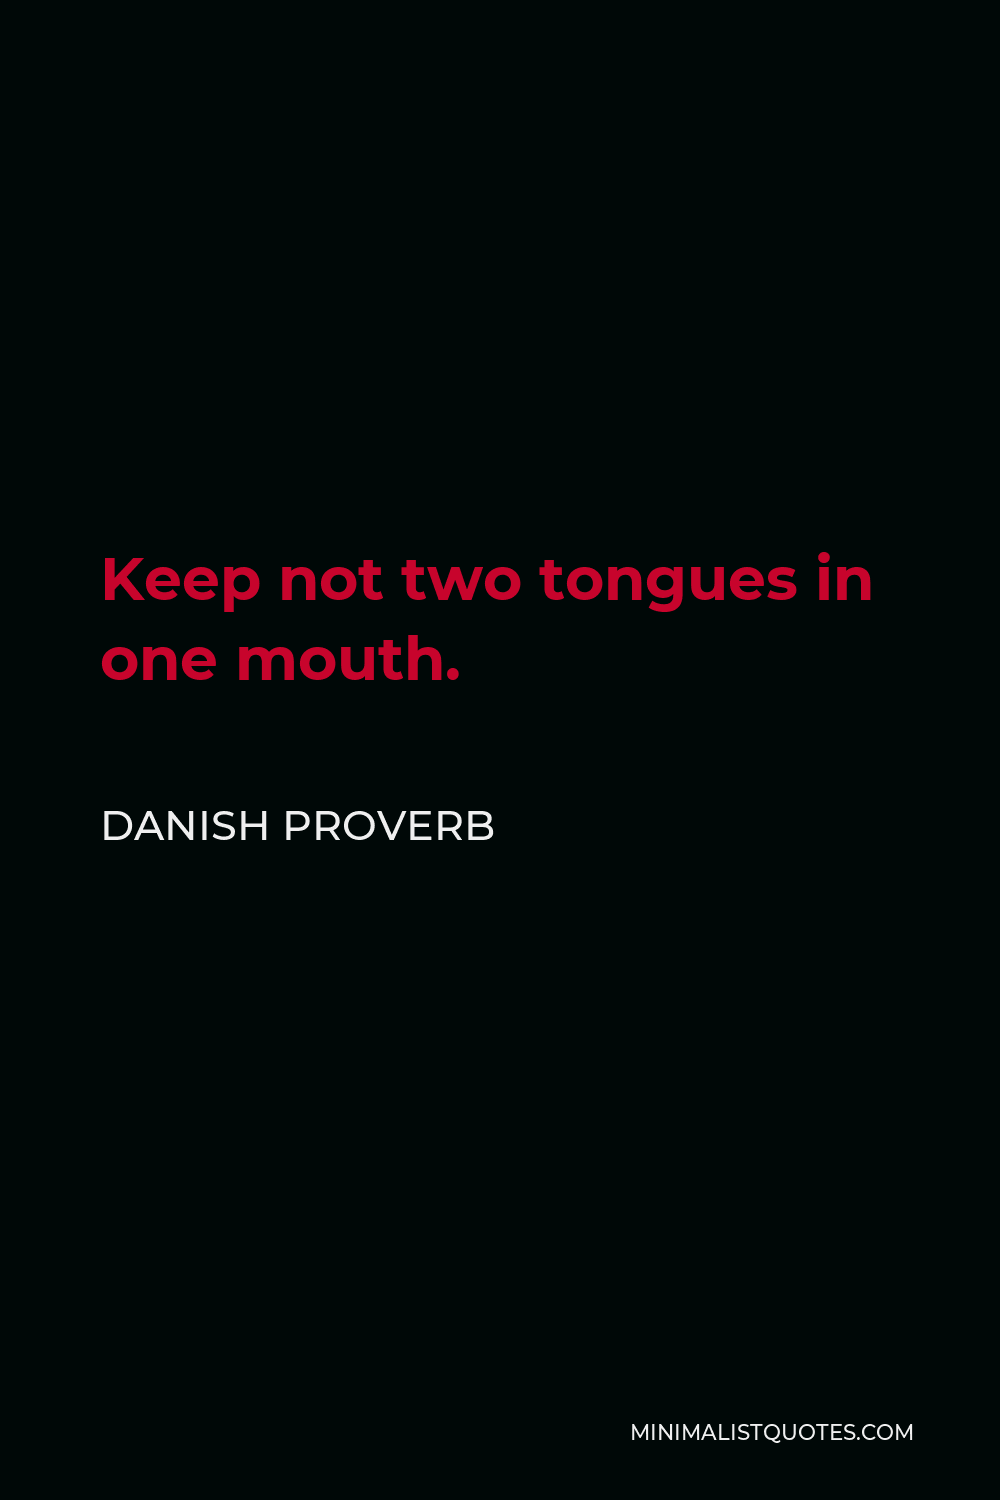 Danish Proverb Quote - Keep not two tongues in one mouth.